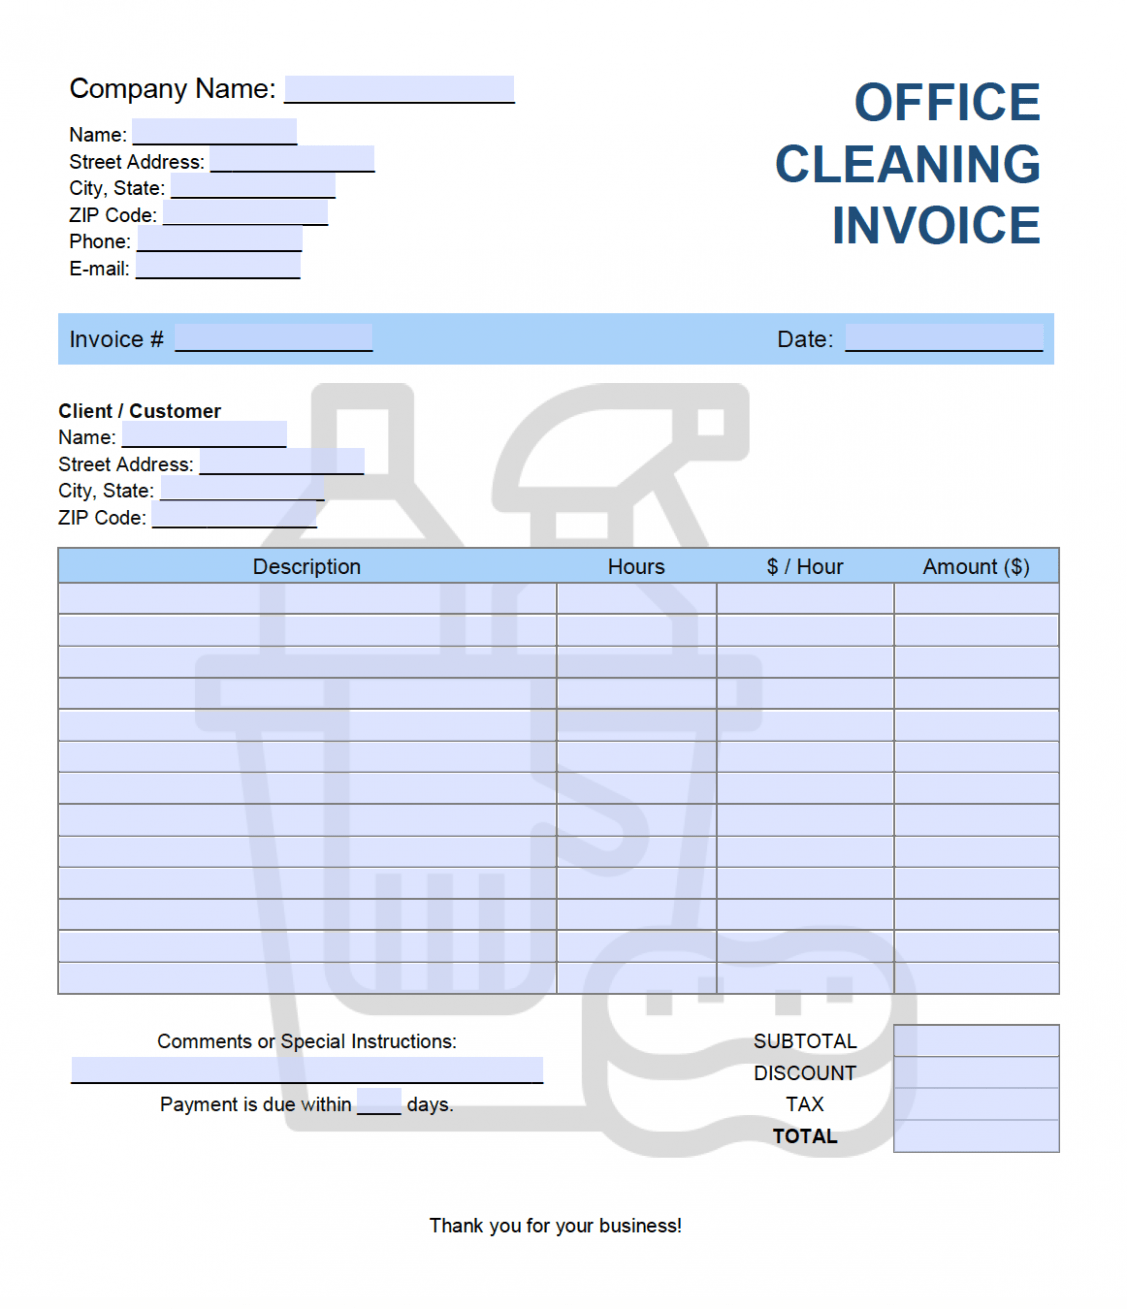 Editable Office Cleaning Invoice Template Sample